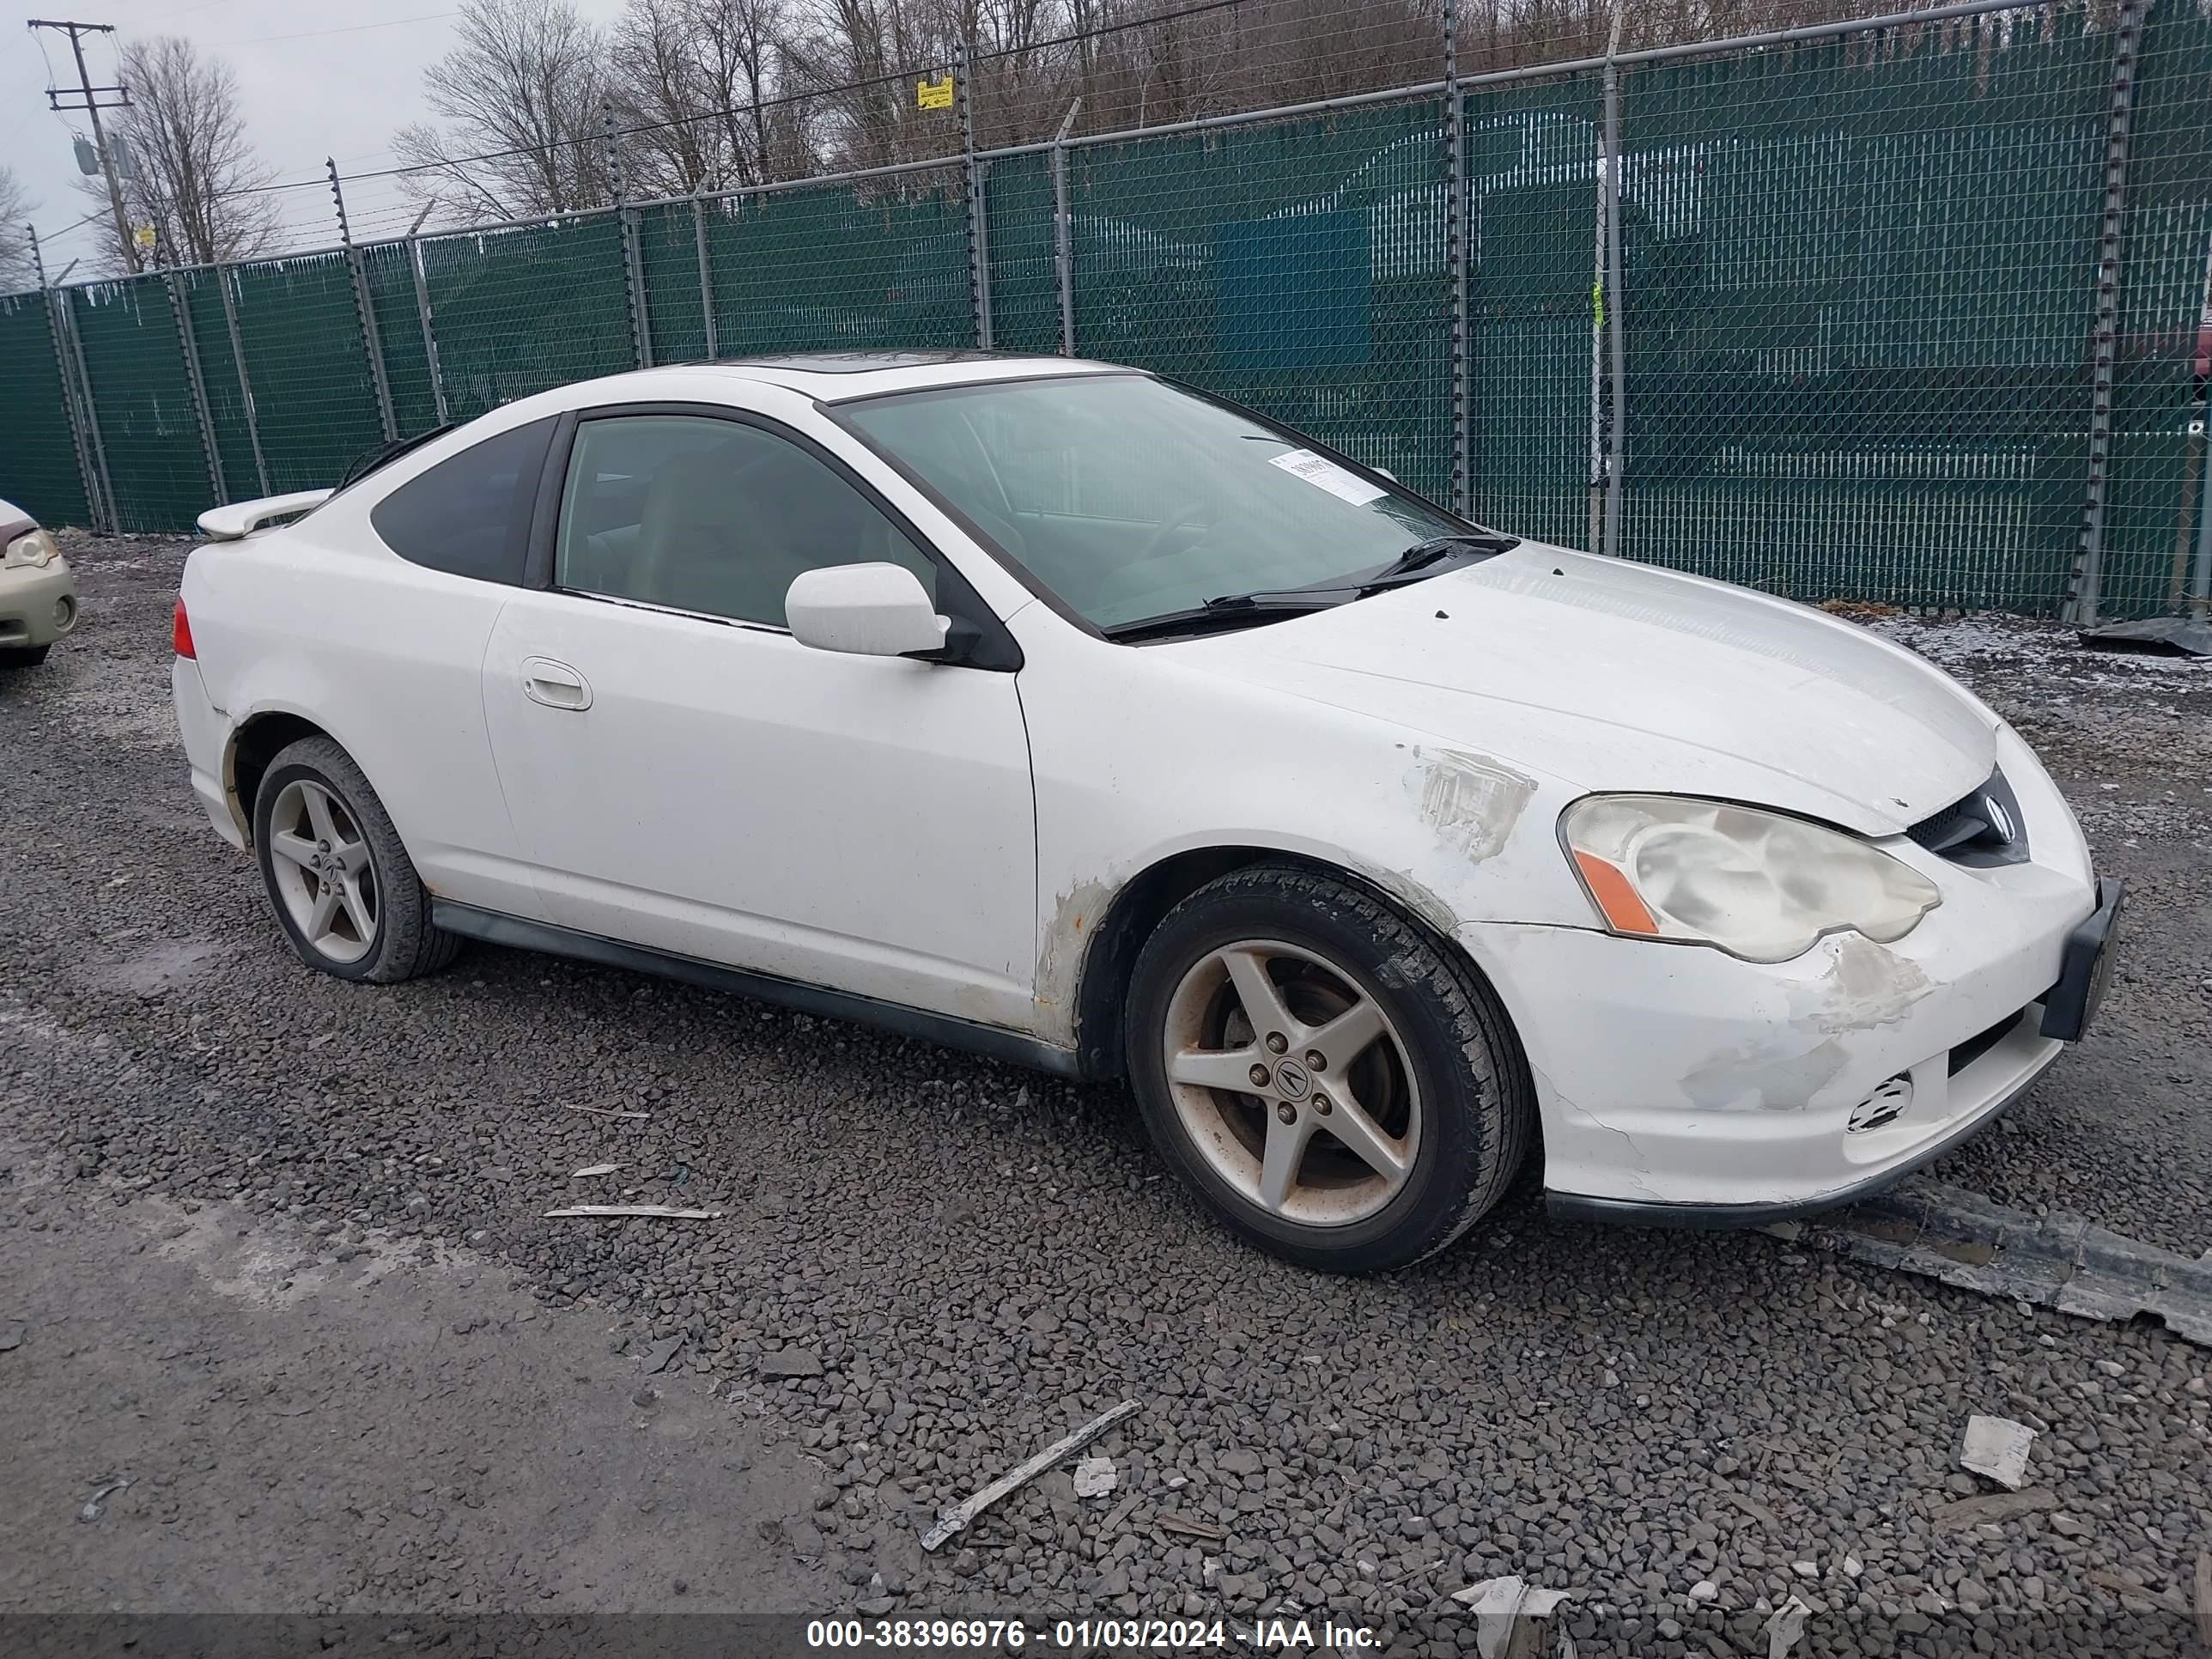 VIN: JH4DC53833S003599 - acura rsx